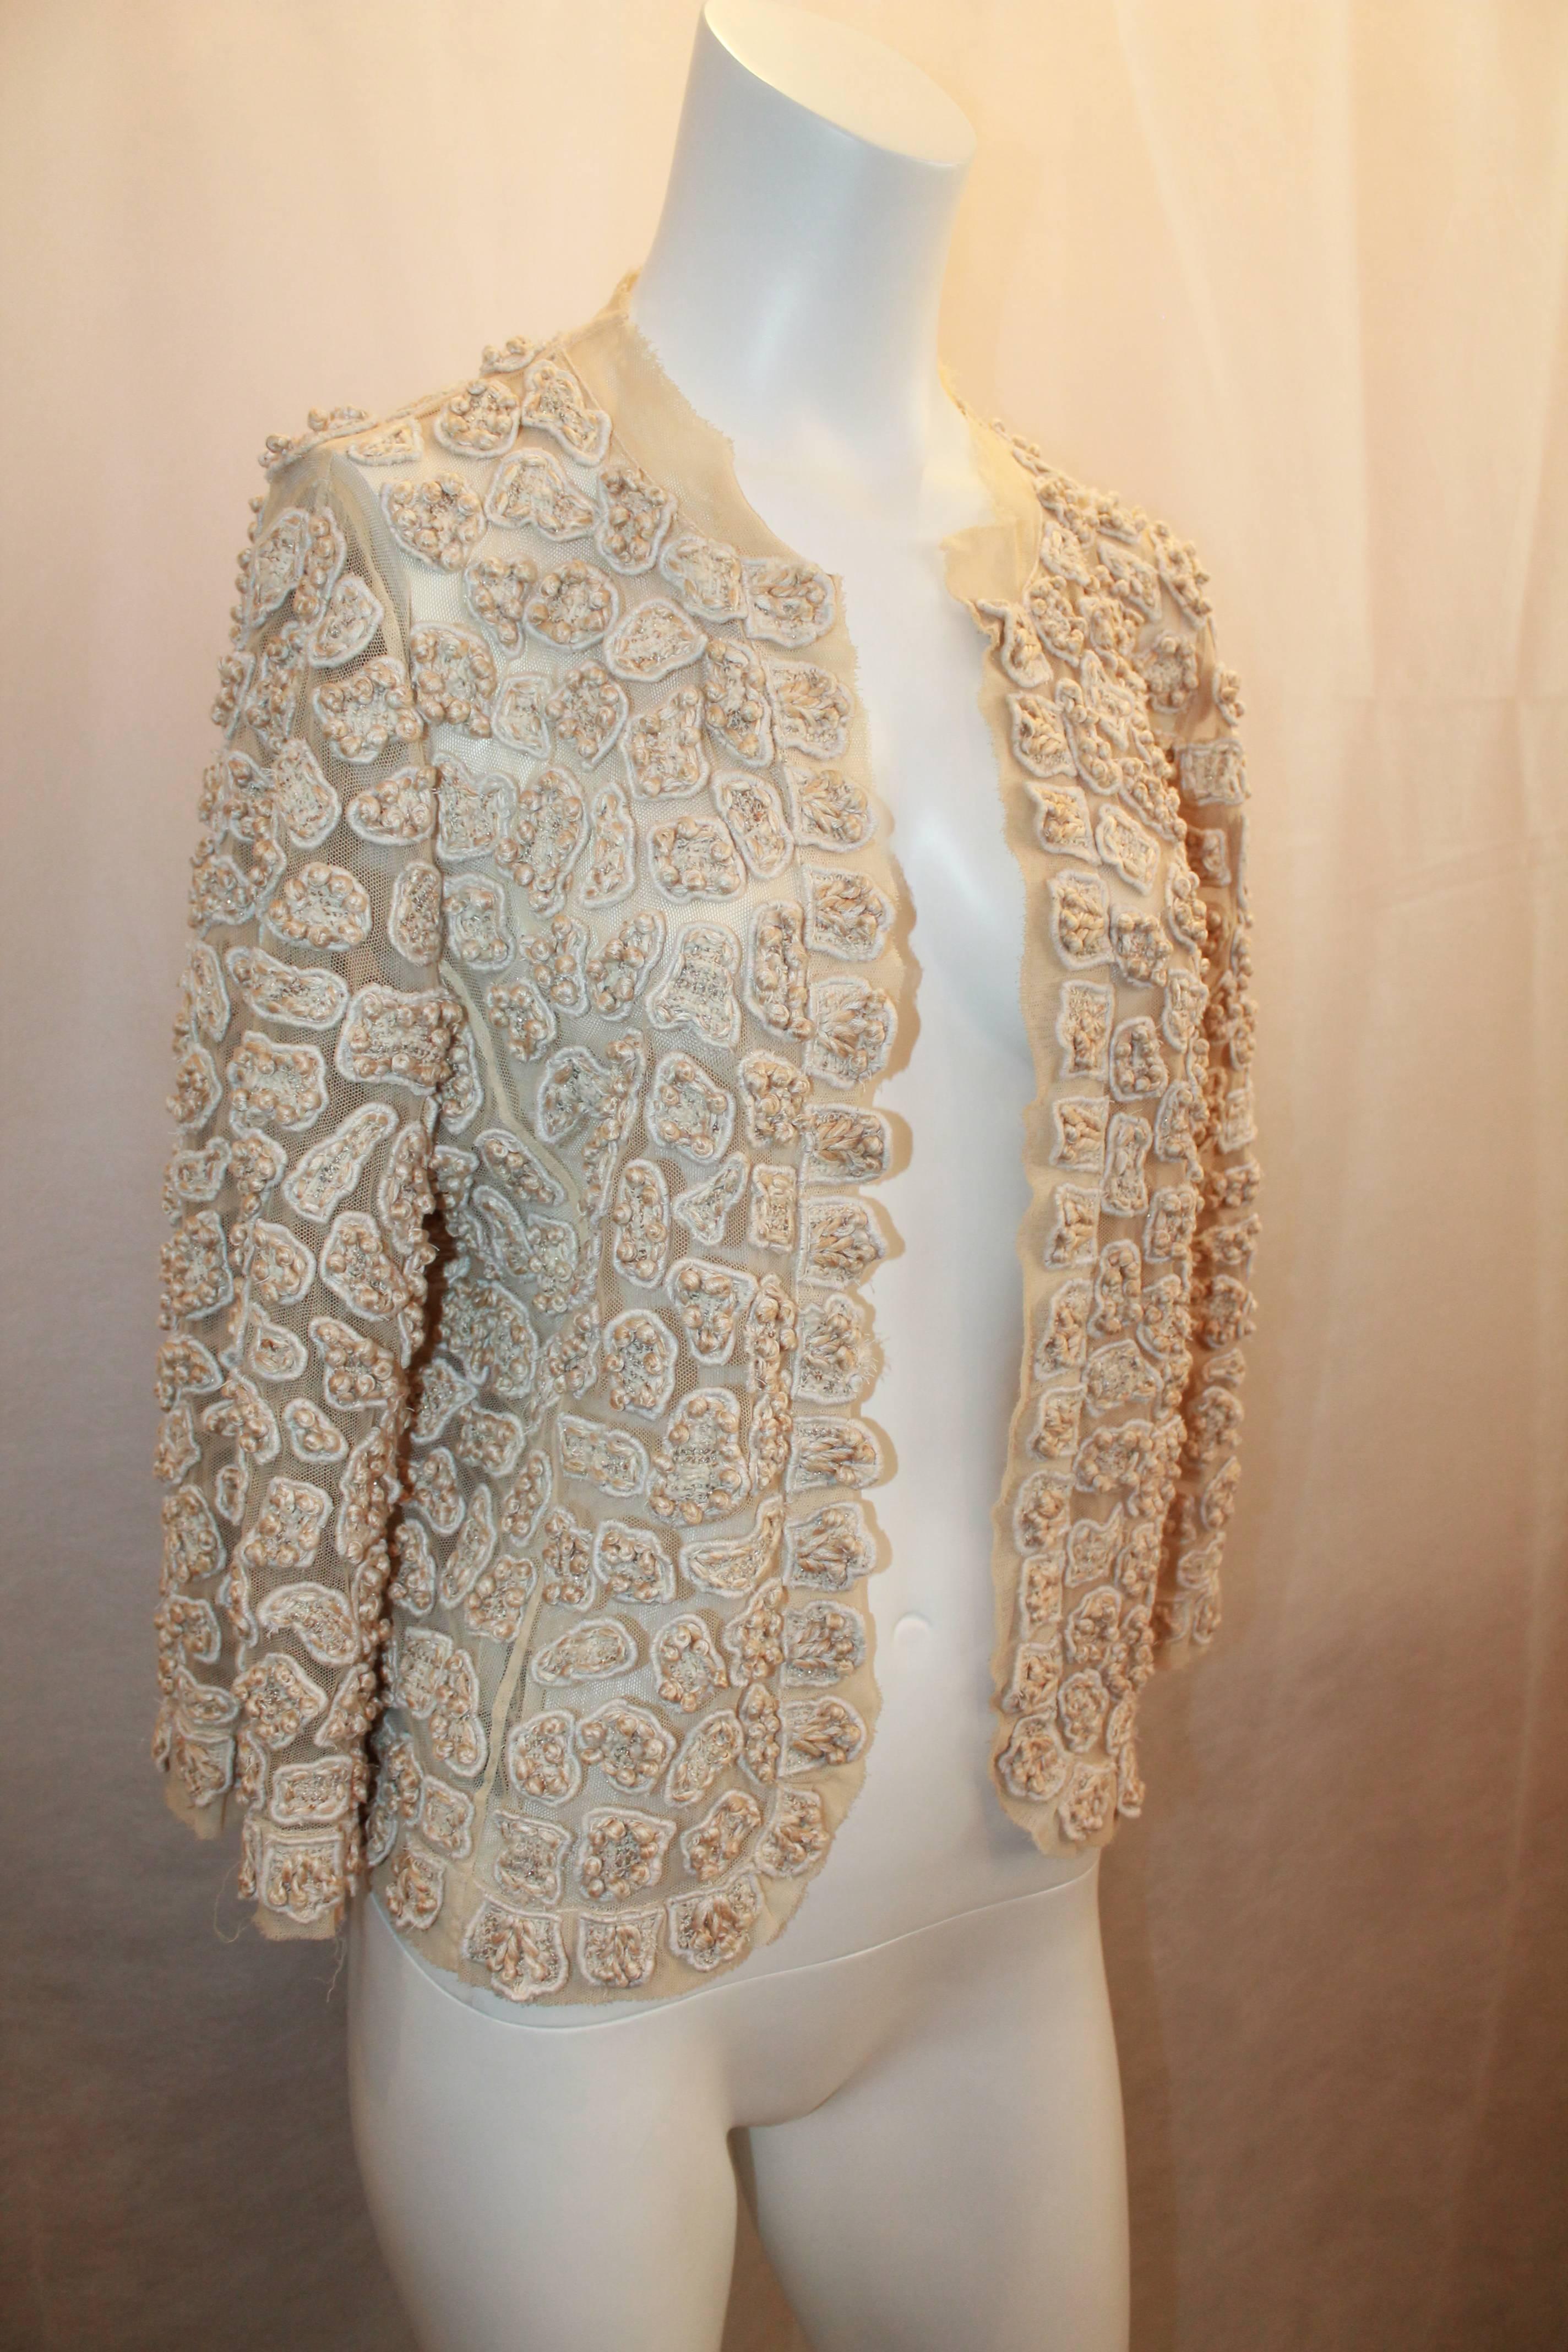 Oscar de la Renta Ivory Cotton Blend Heavily Embroidered Soutache Lace Jacket - Size 6 from the 2007 Resort Collection.   This gorgeous jacket is in excellent condition with only minor threads beginning to come loose on the mesh.  It features a mesh